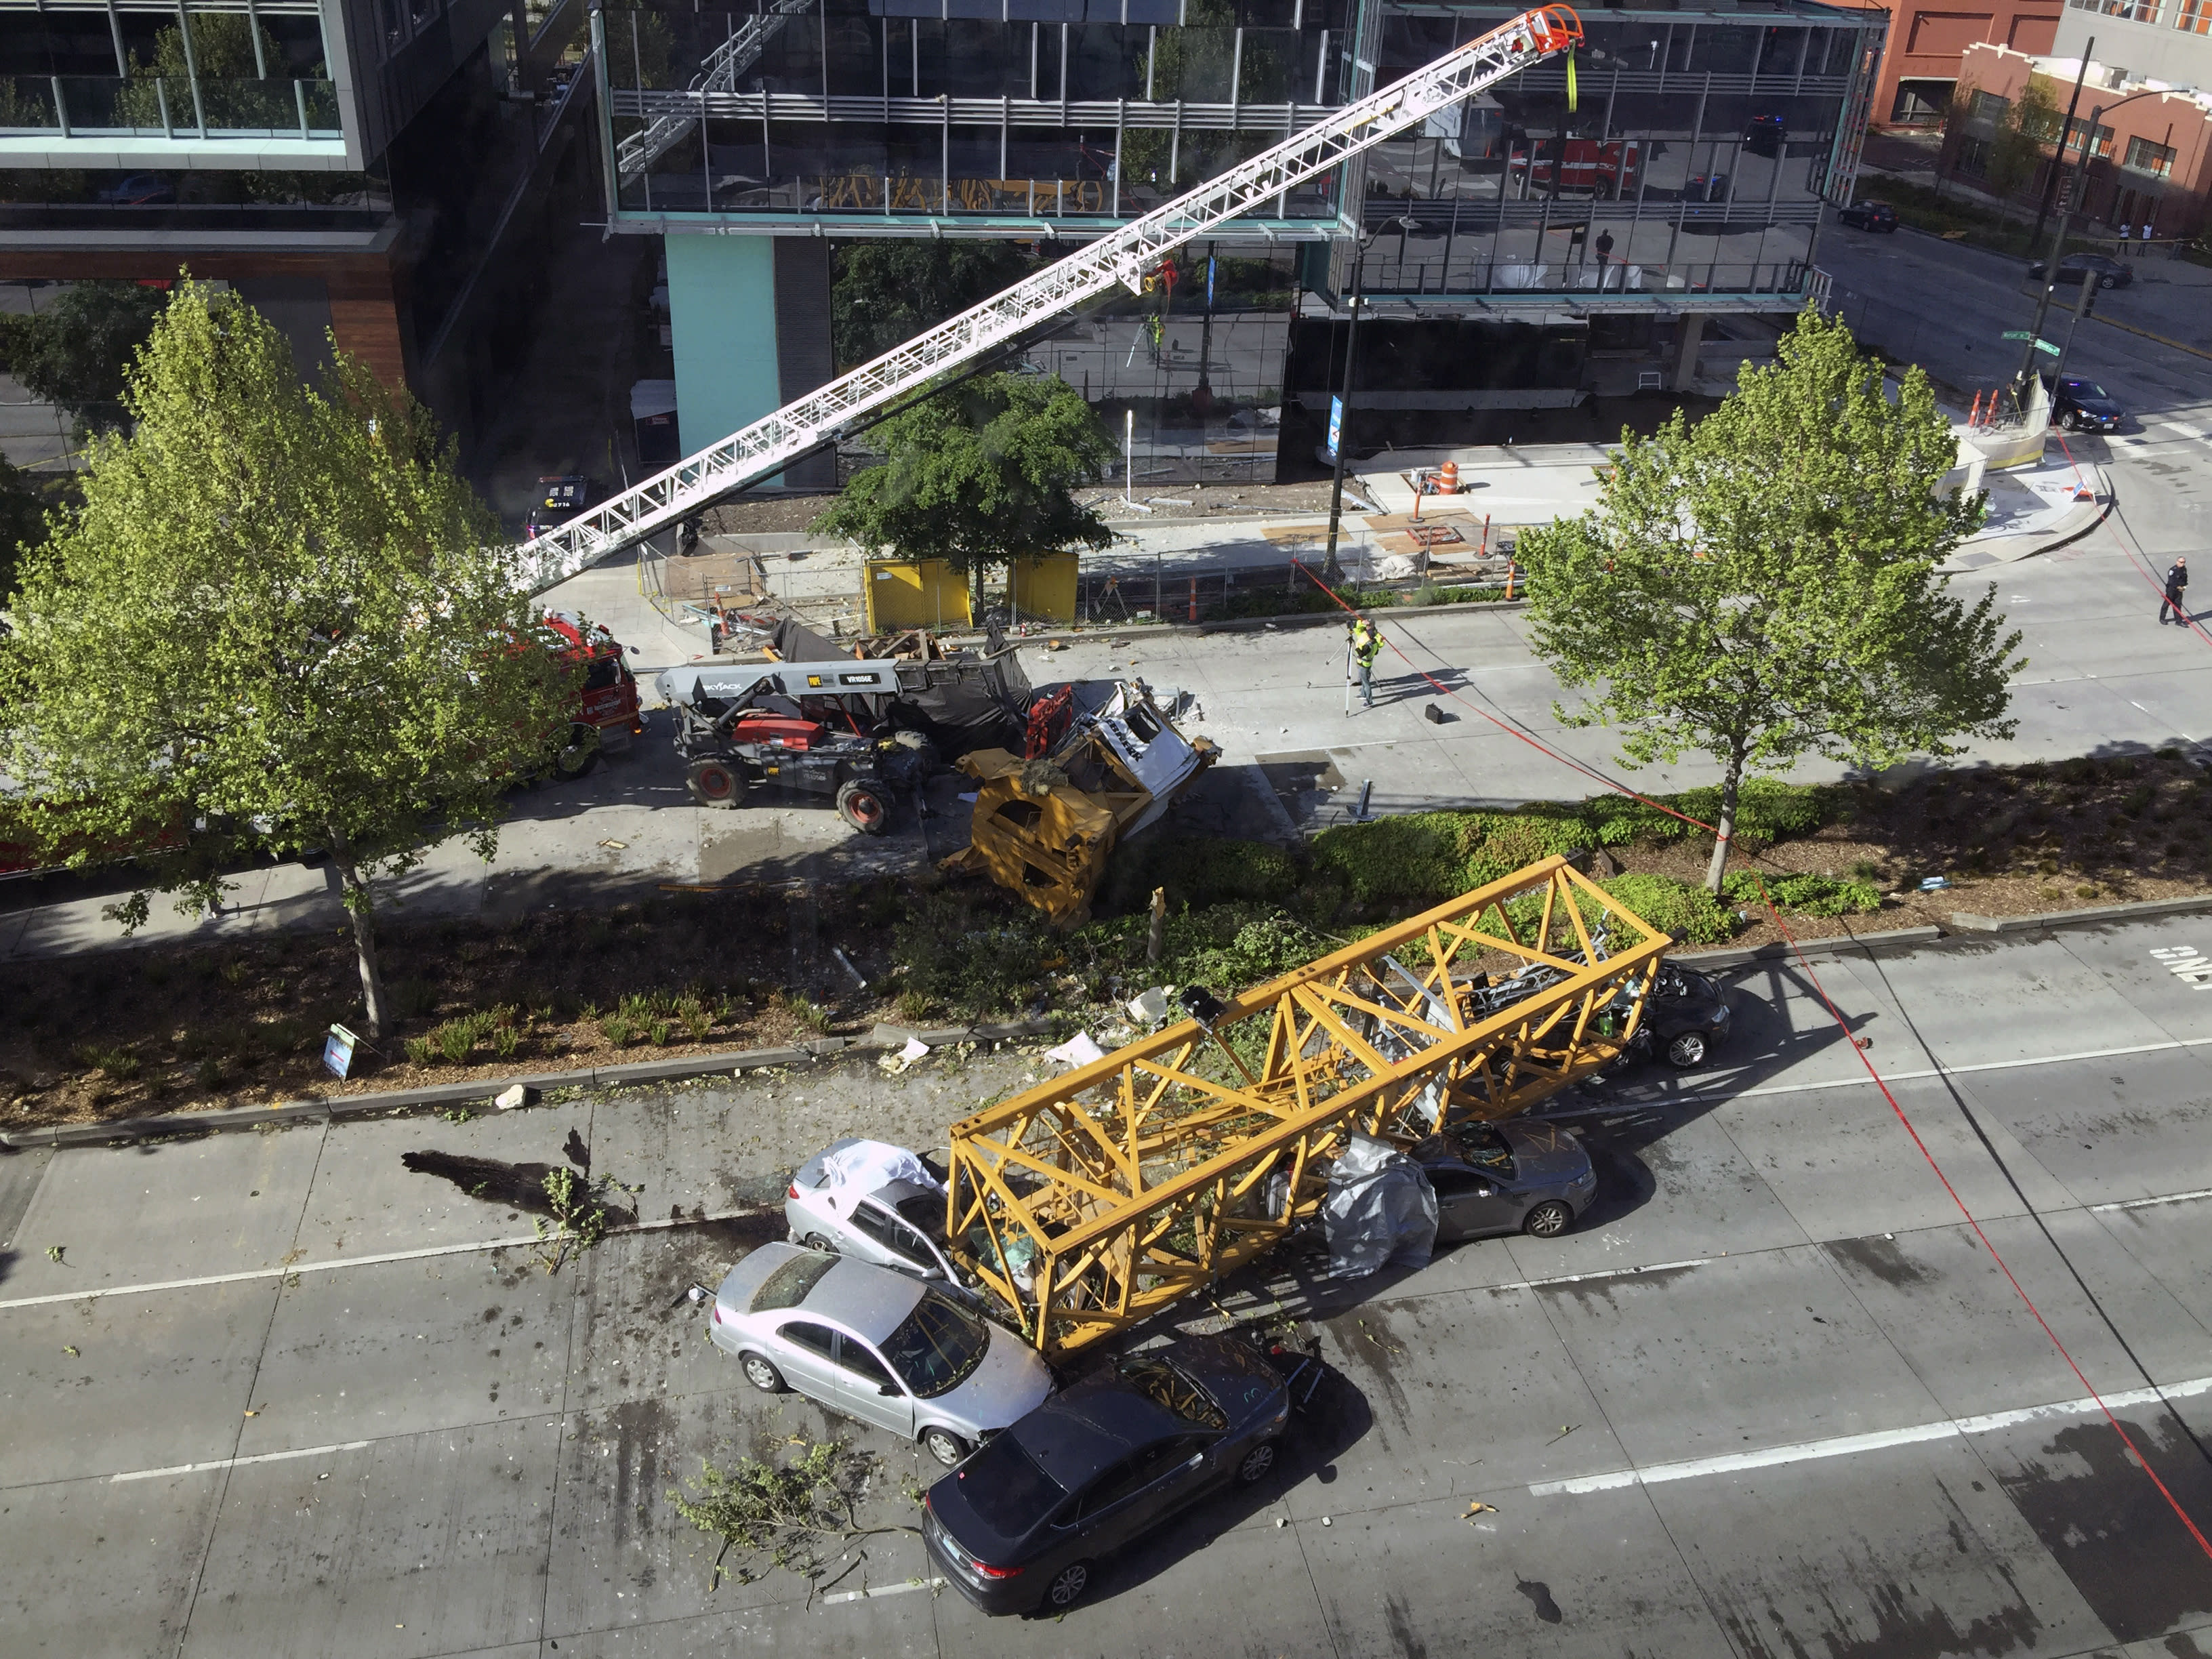 Seattle college says student was among those killed by crane